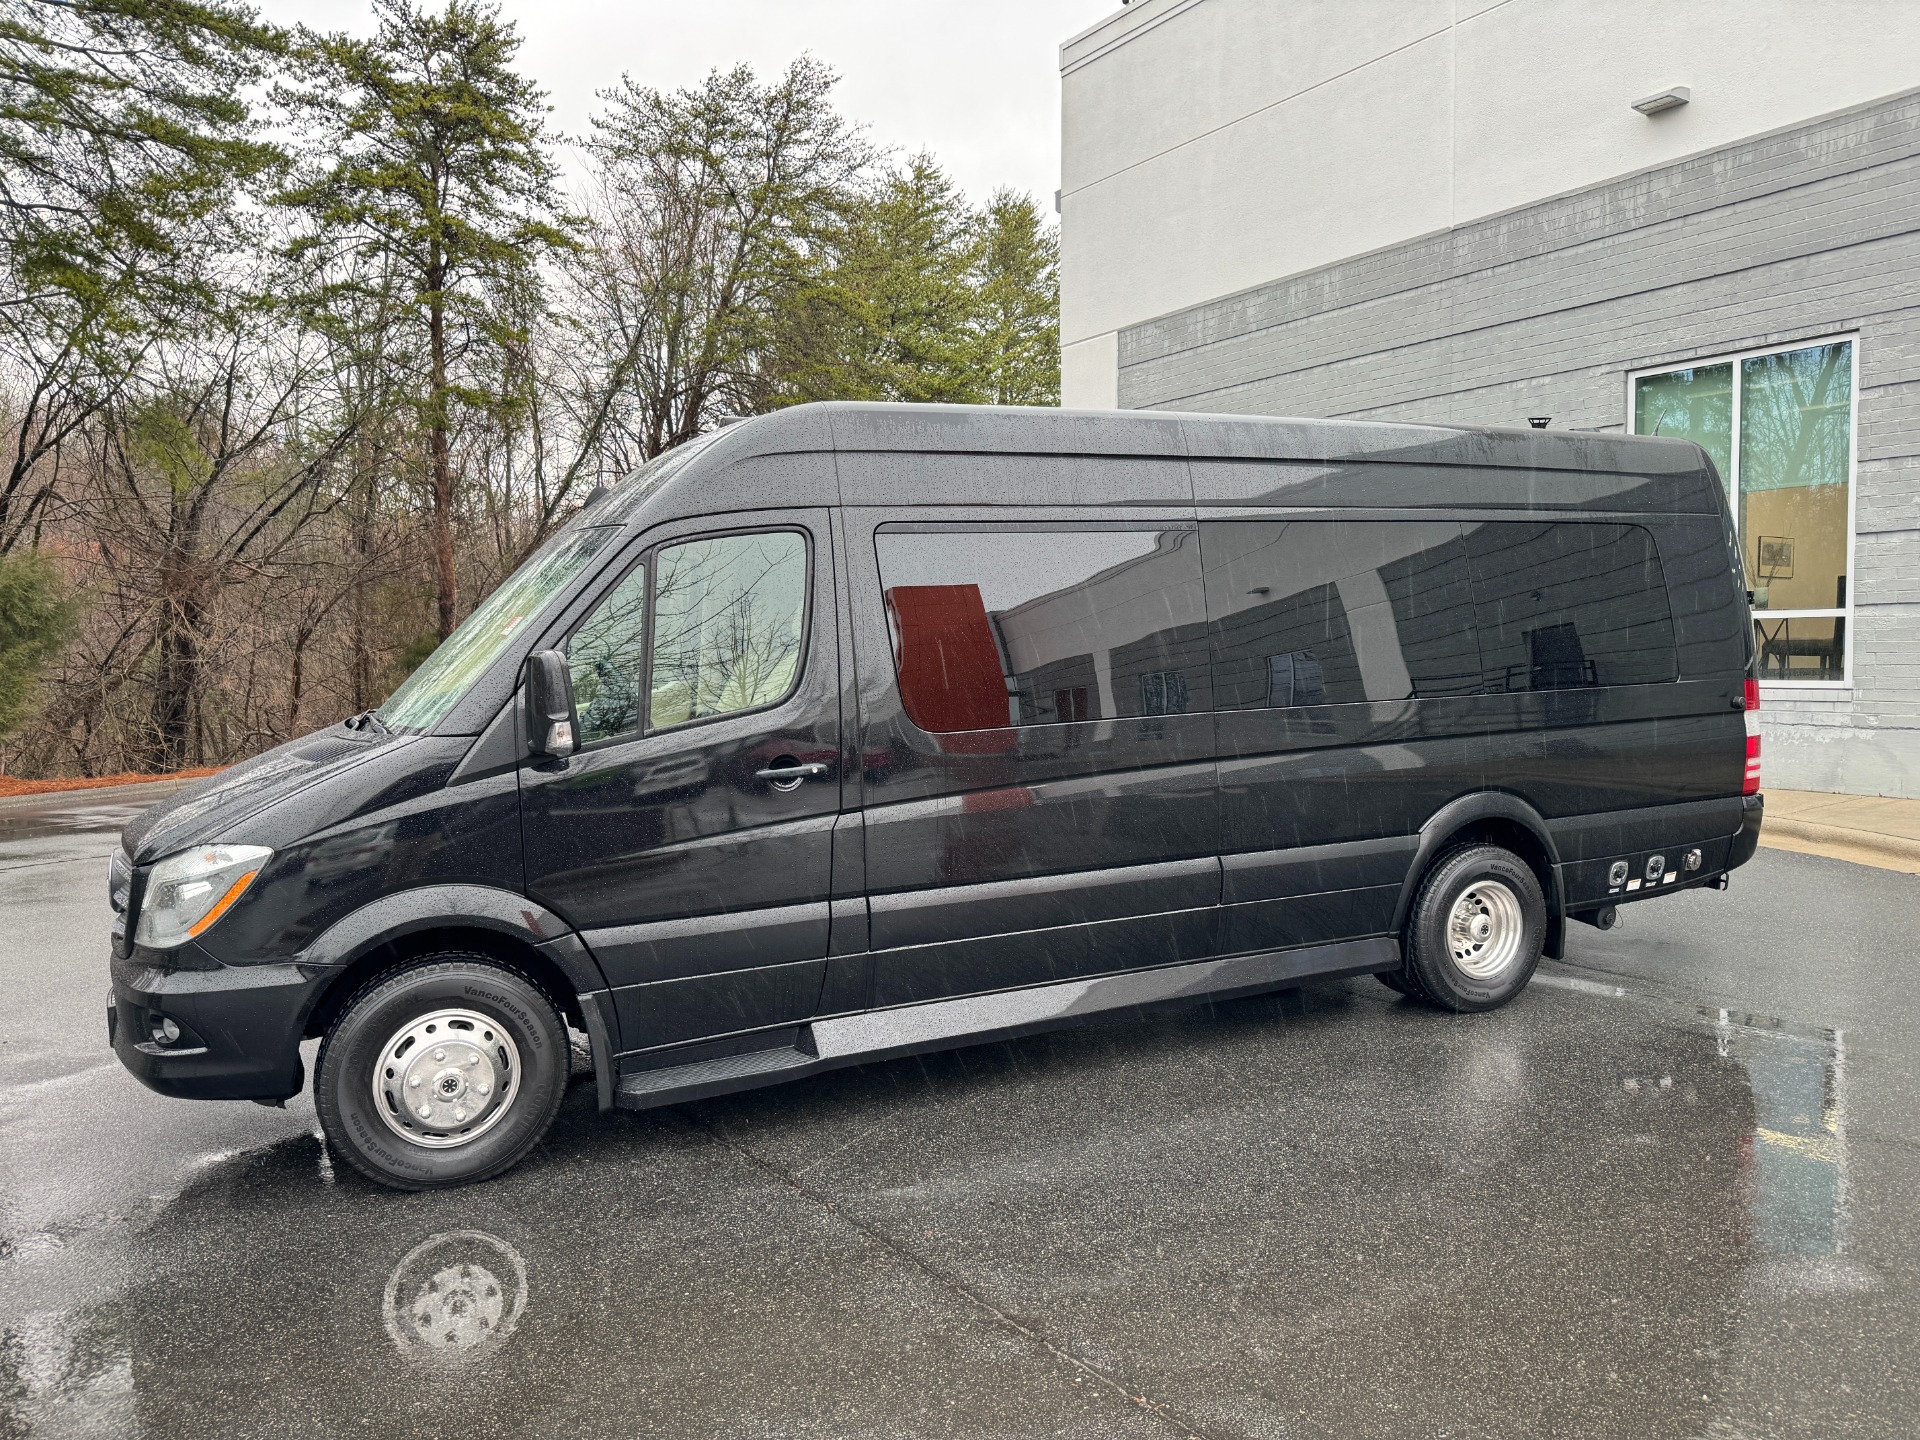 Used 2017 Mercedes-Benz Sprinter Cargo Van MIDWEST JET VAN CONVERSION for sale $120,000 at Formula Imports in Charlotte NC 28227 4